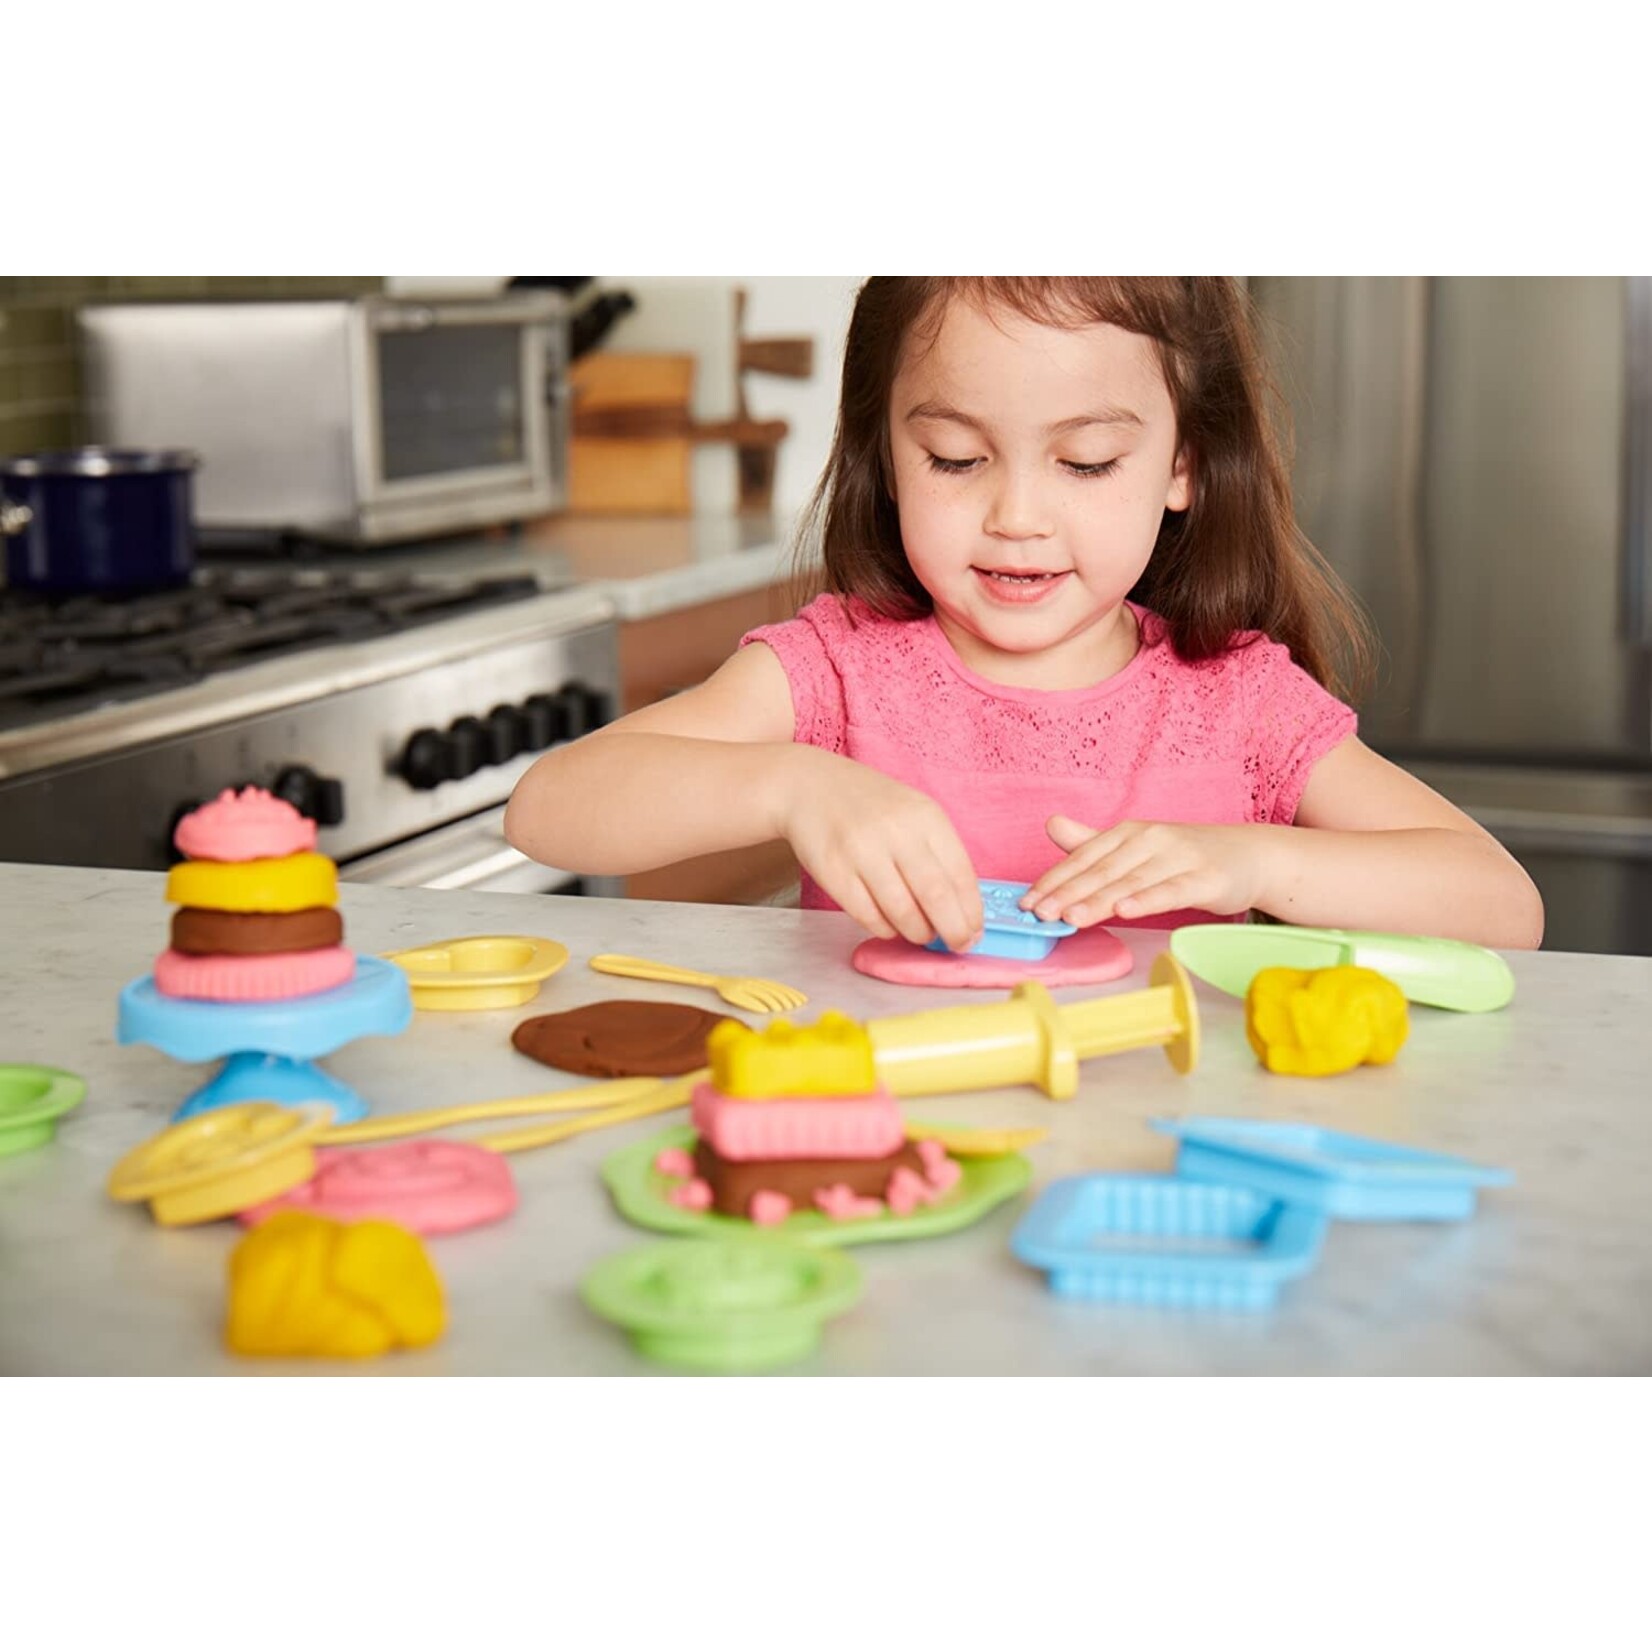 Play-doh Cake Making Station Cupcake Maker Bakery Set by Funtoys Play-Doh  Egg Surprise - video Dailymotion